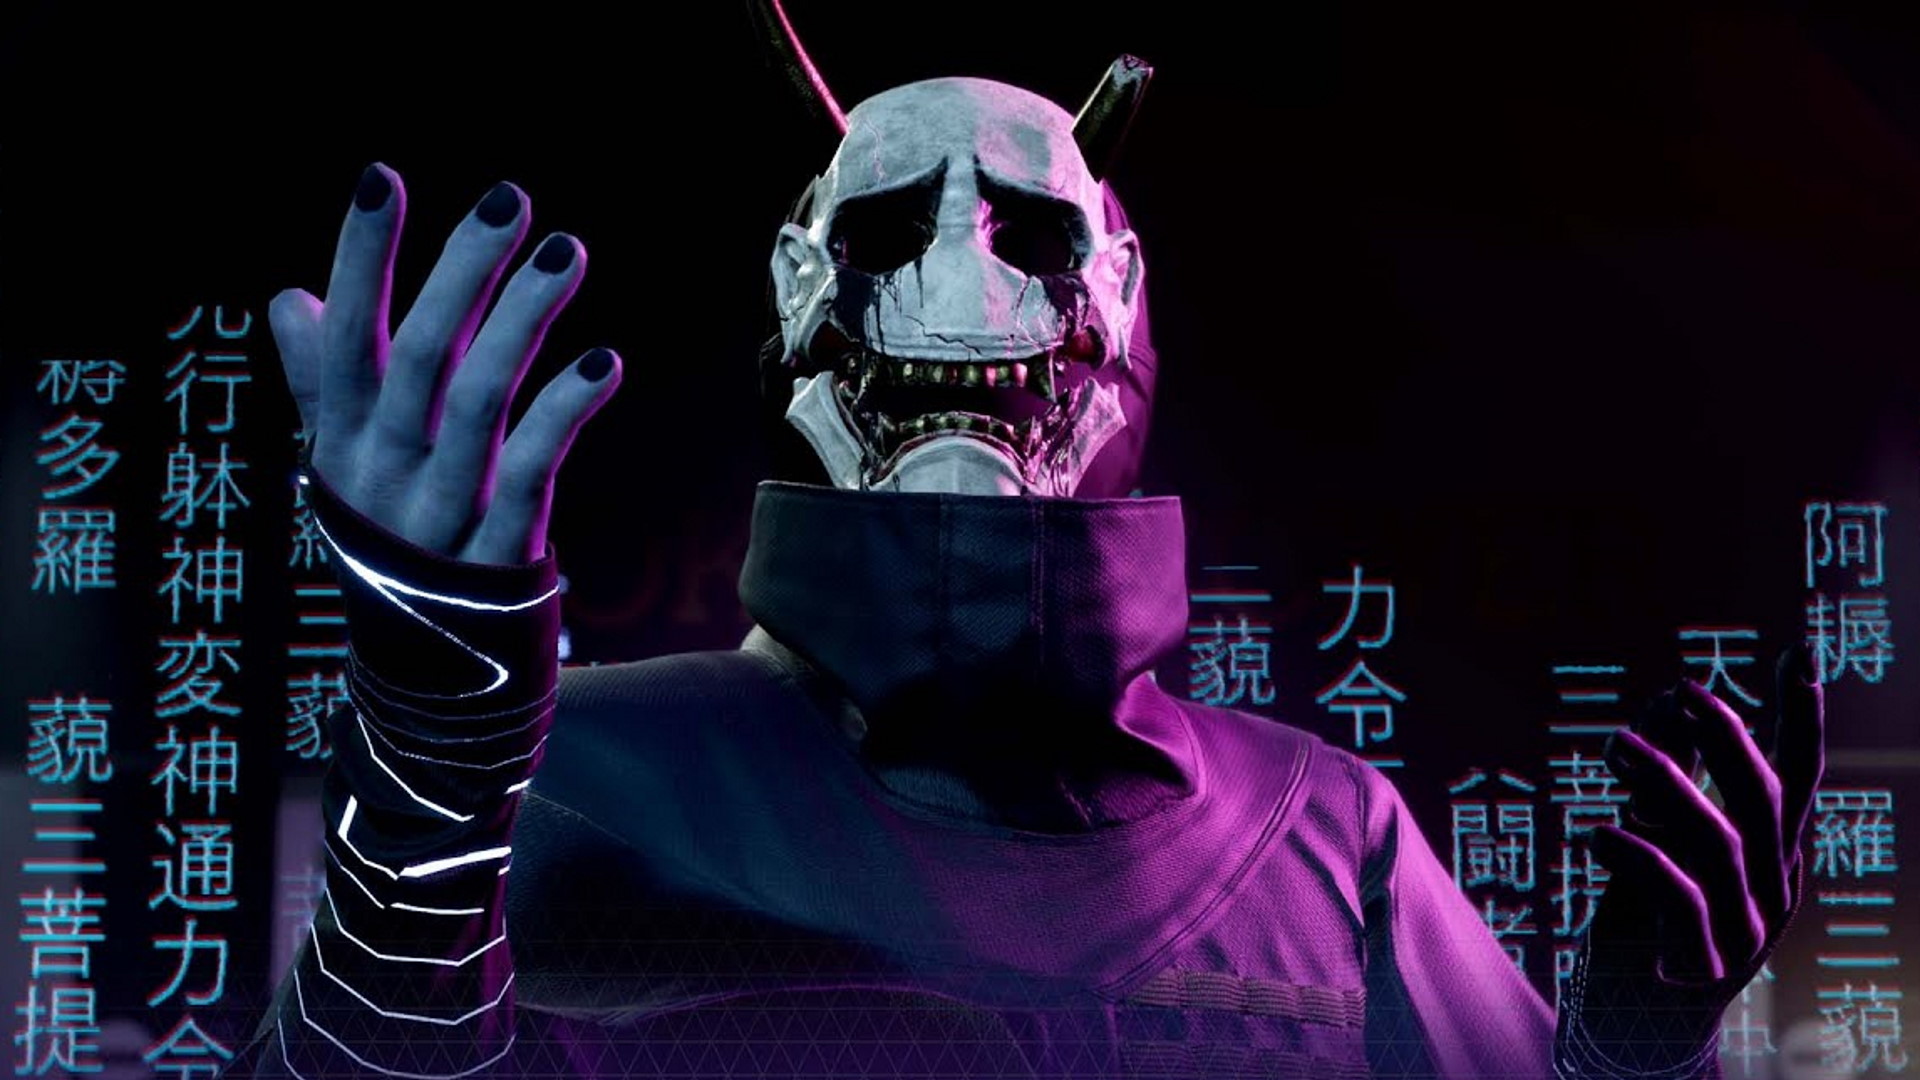  Ghostwire: Tokyo is more Watch Dogs 2 than The Evil Within, but that's OK with me 